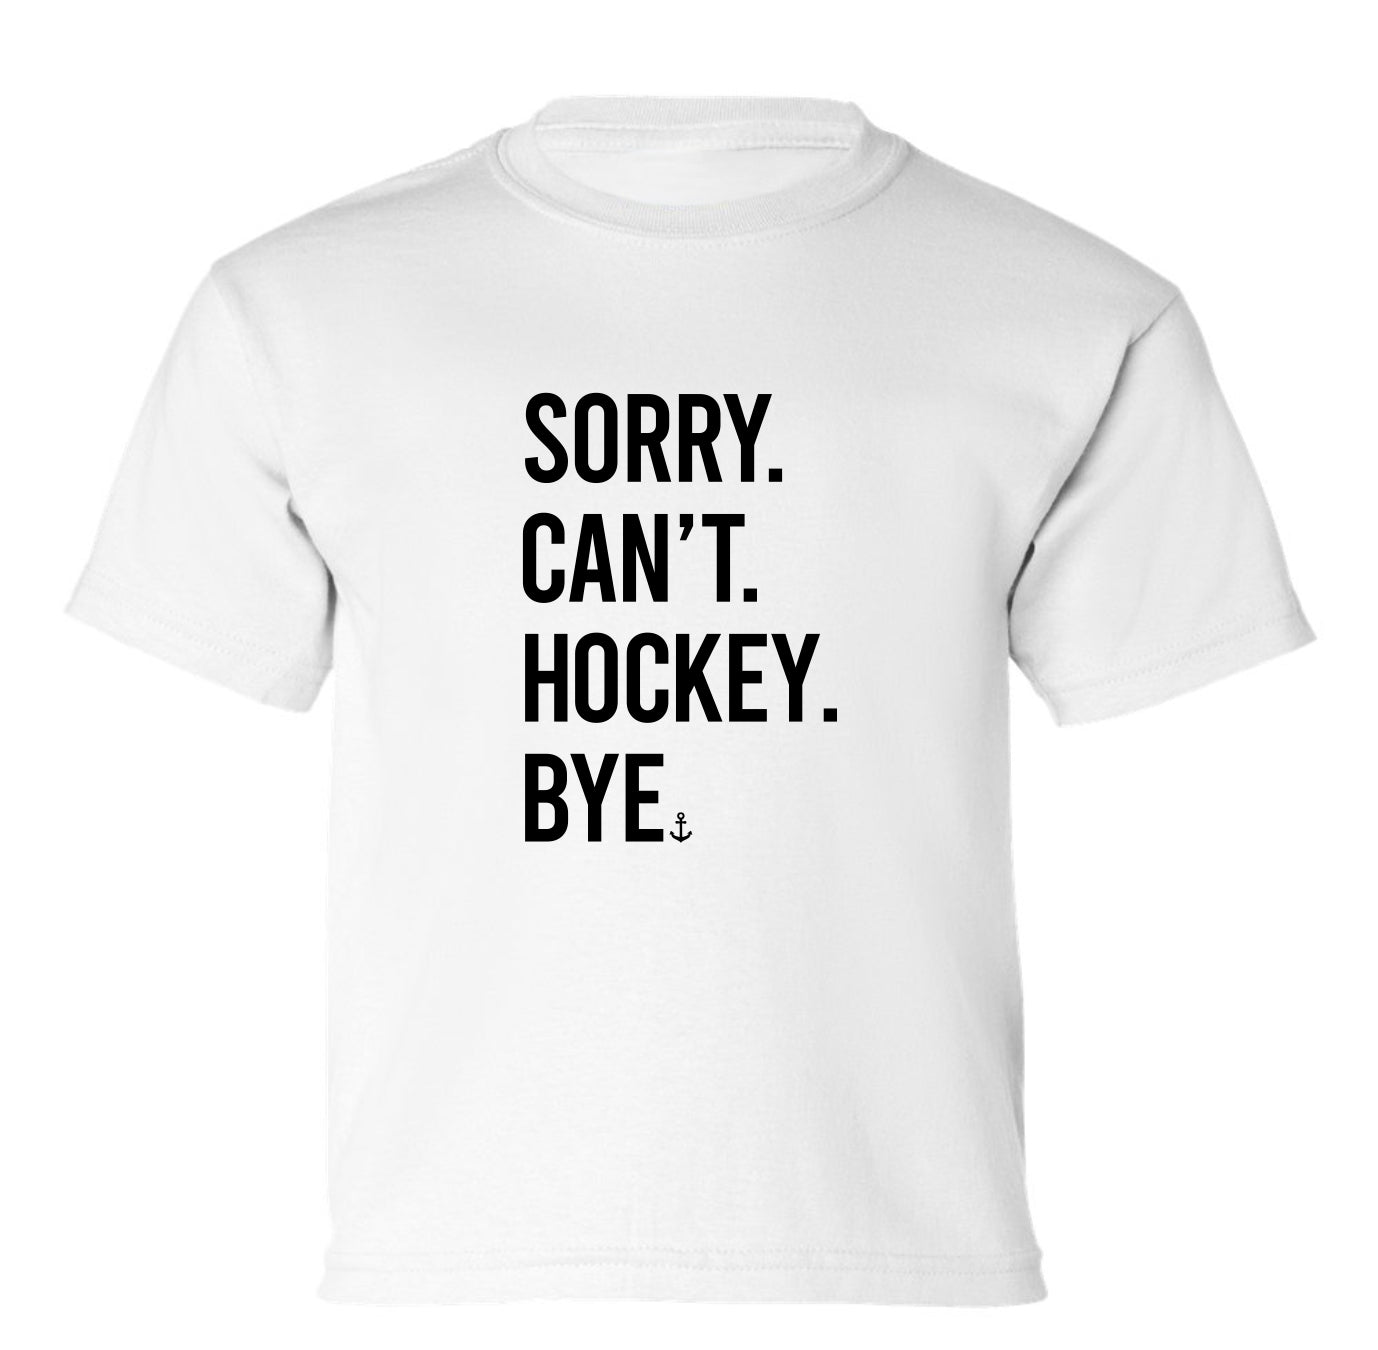 "Sorry. Can't. Hockey. Bye." Toddler/Youth T-Shirt